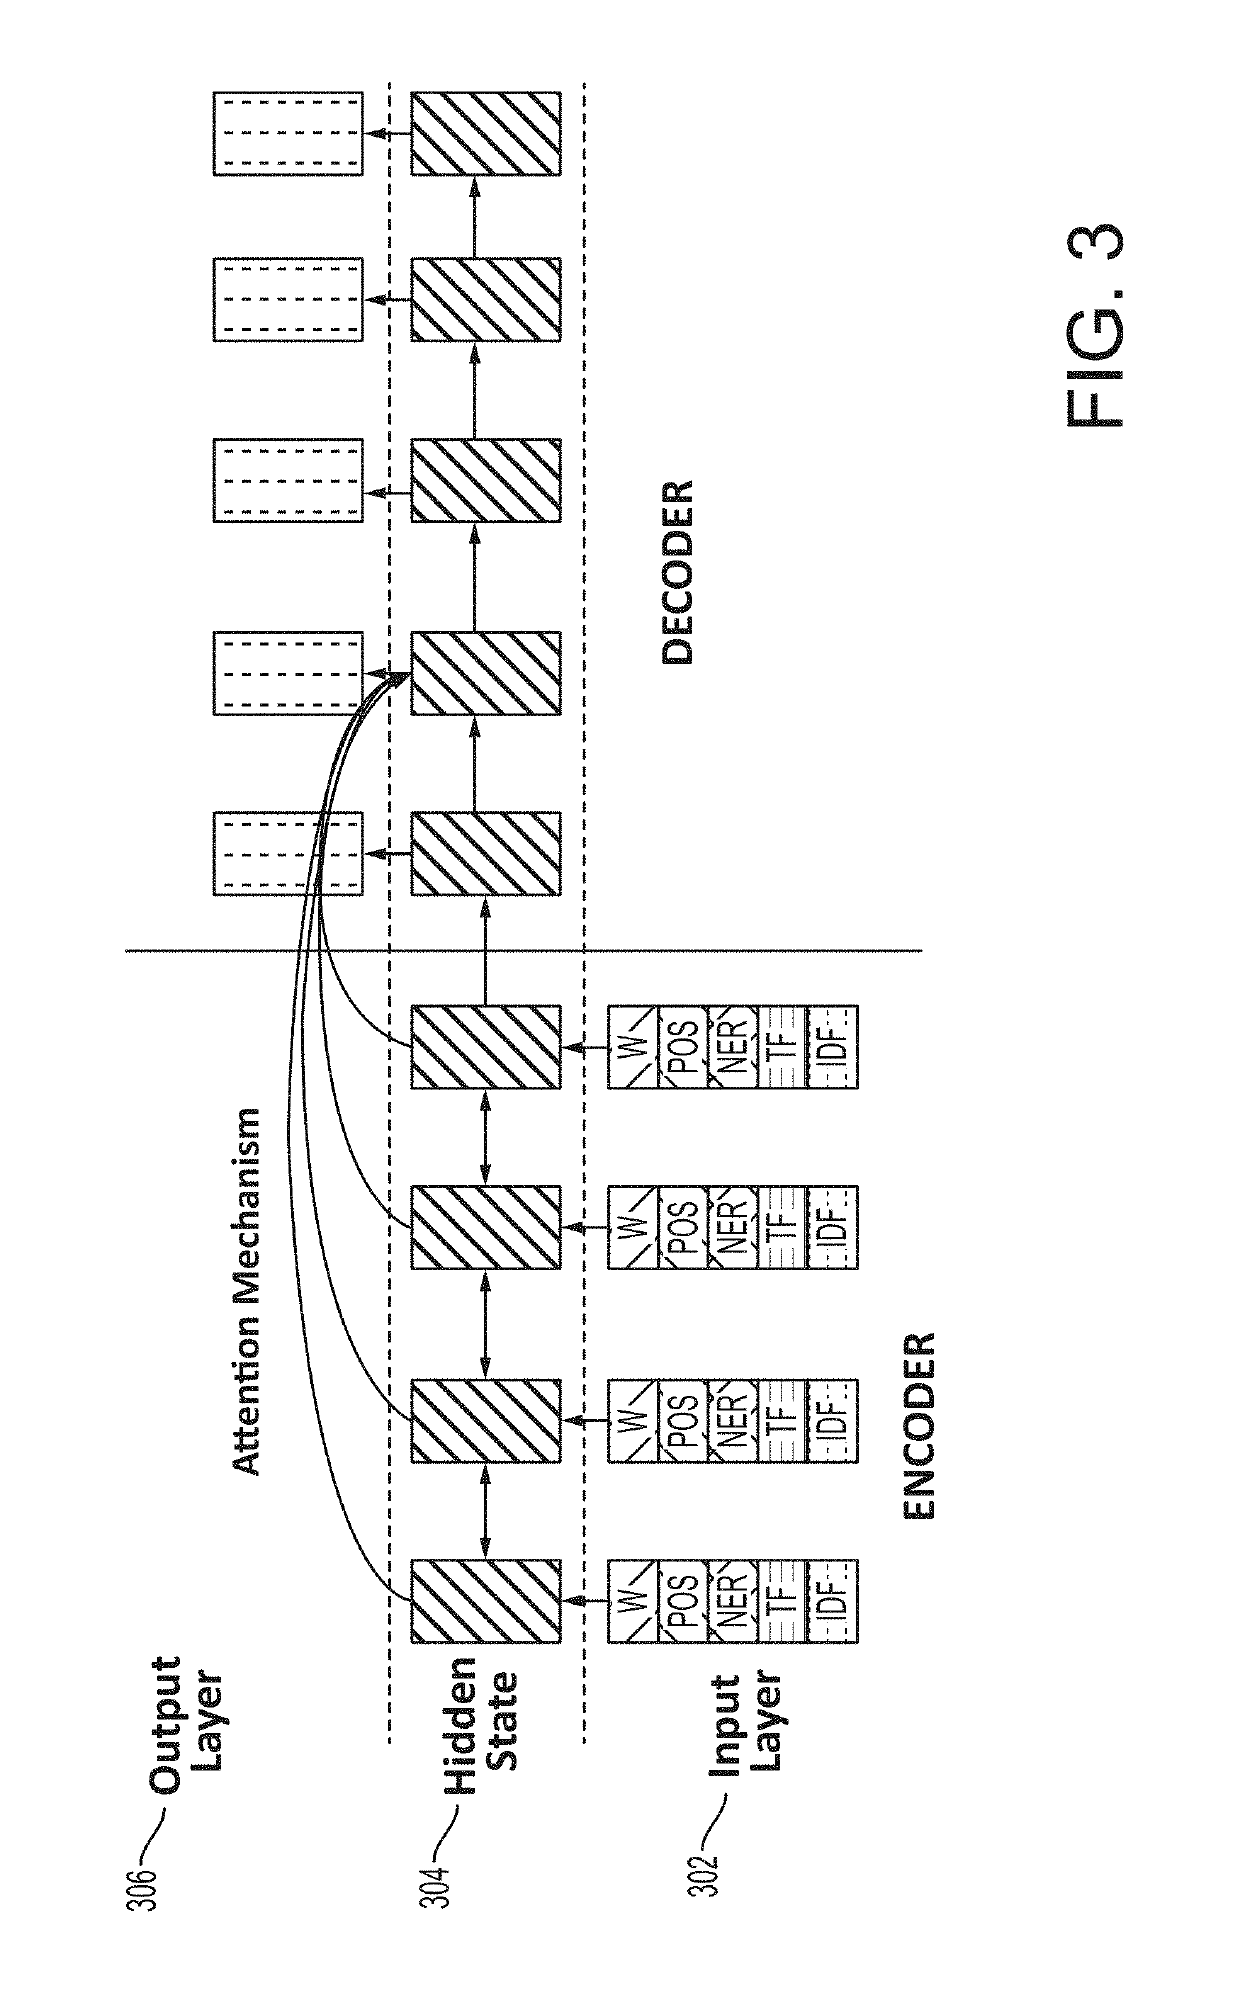 Smart contact lens system with cognitive analysis and aid